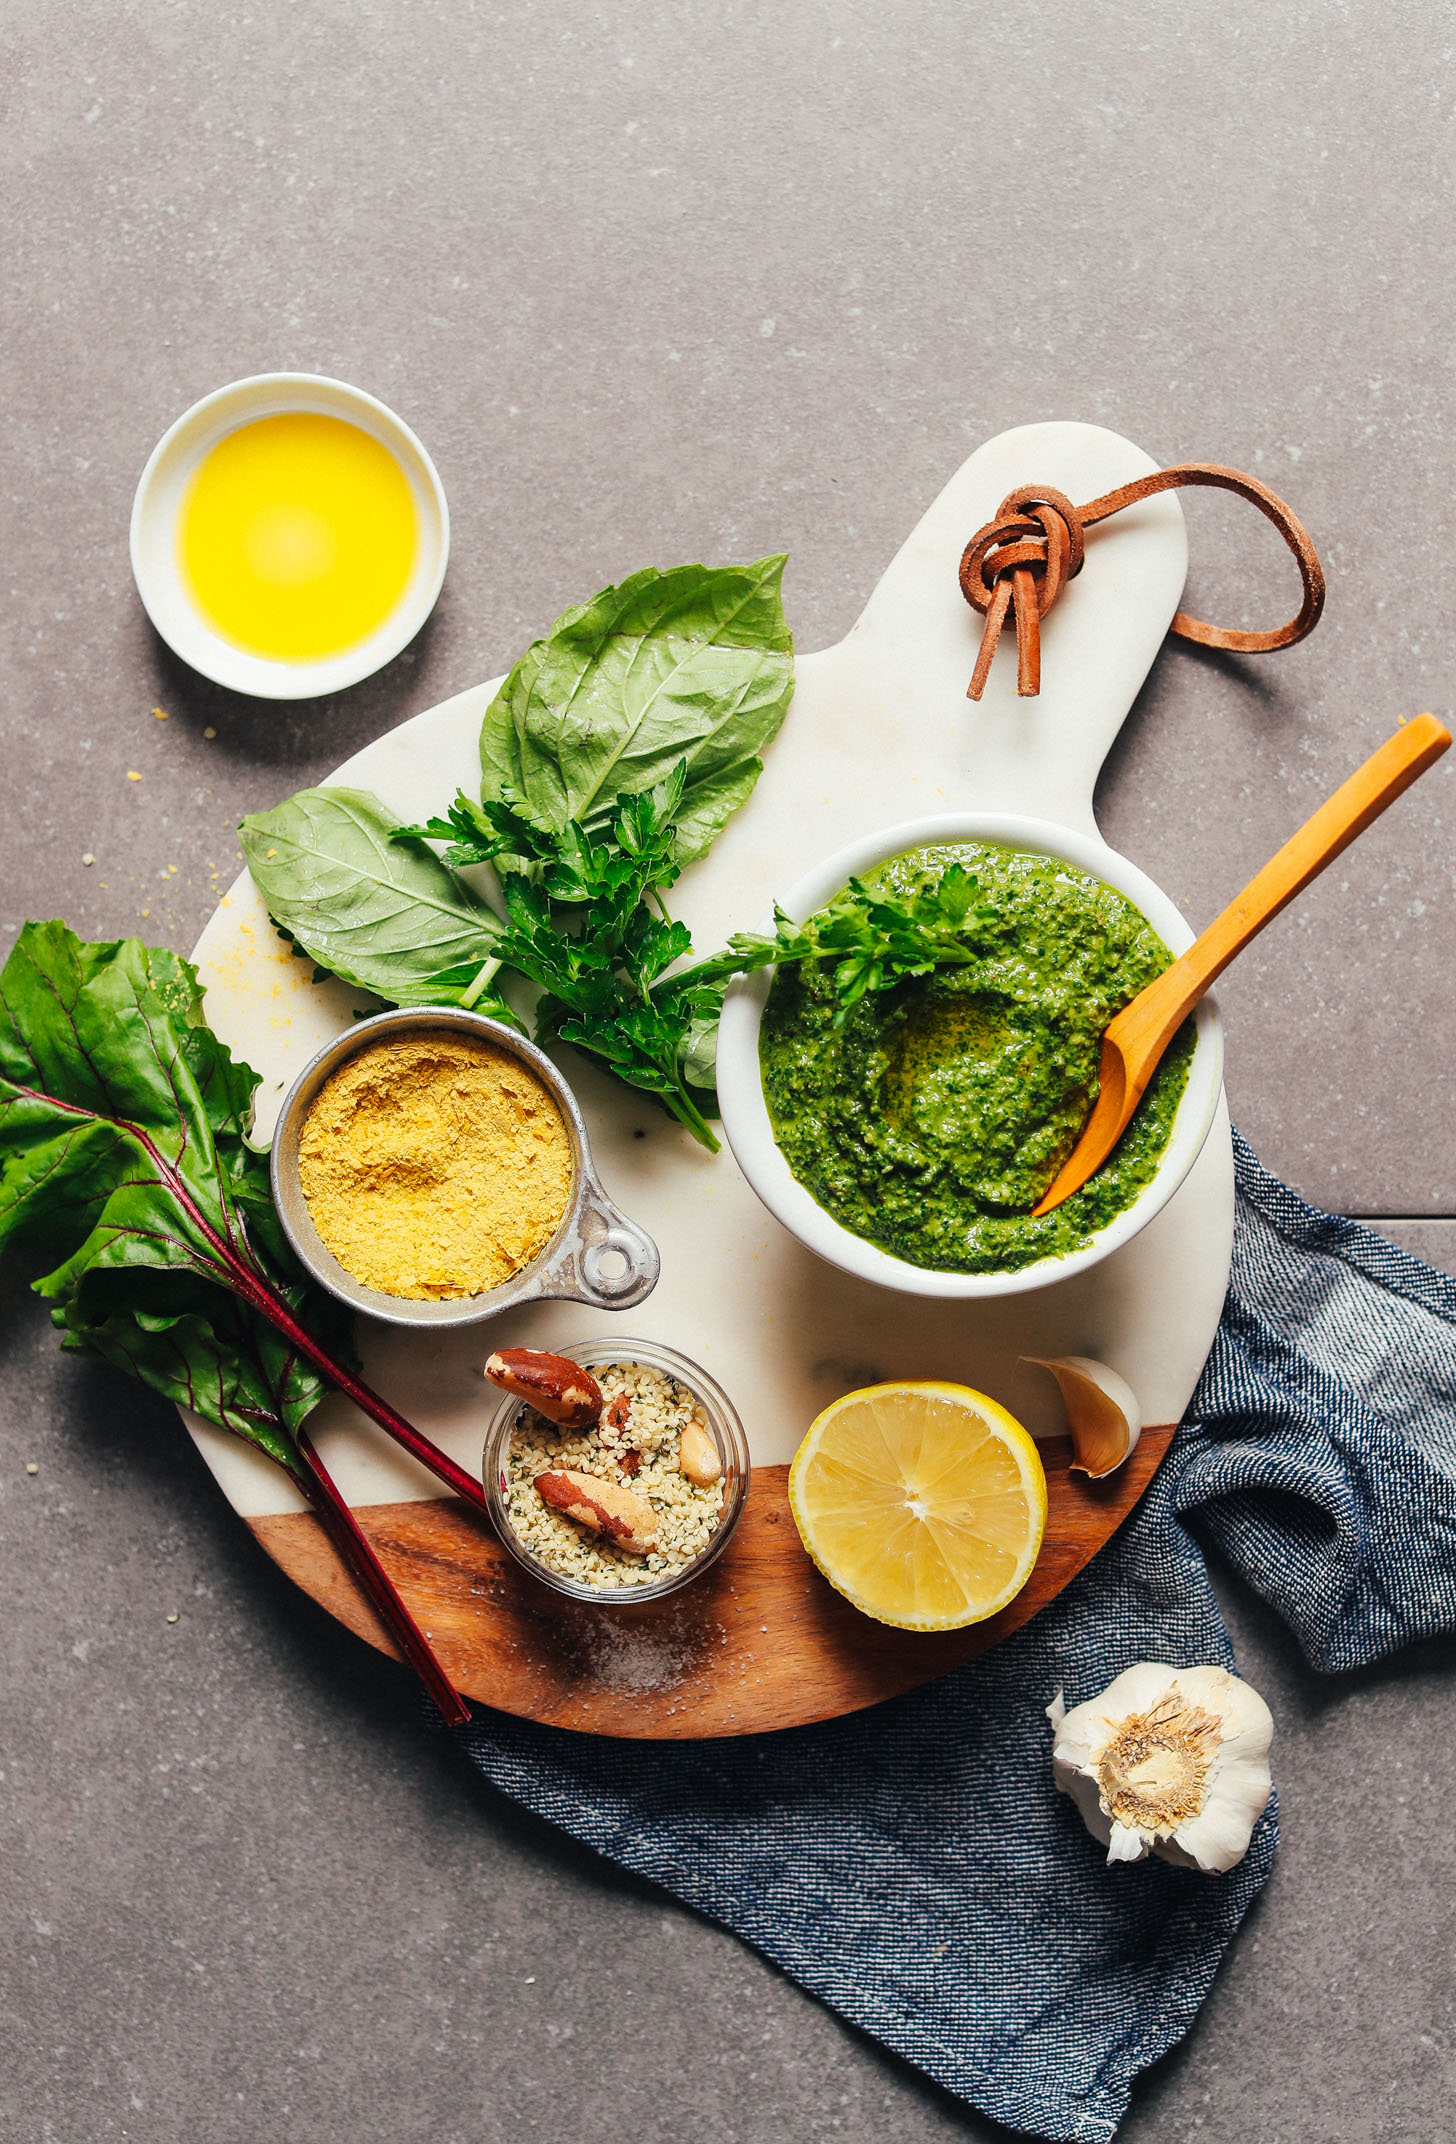 A bowl of pesto surrounded by ingredients used to make it